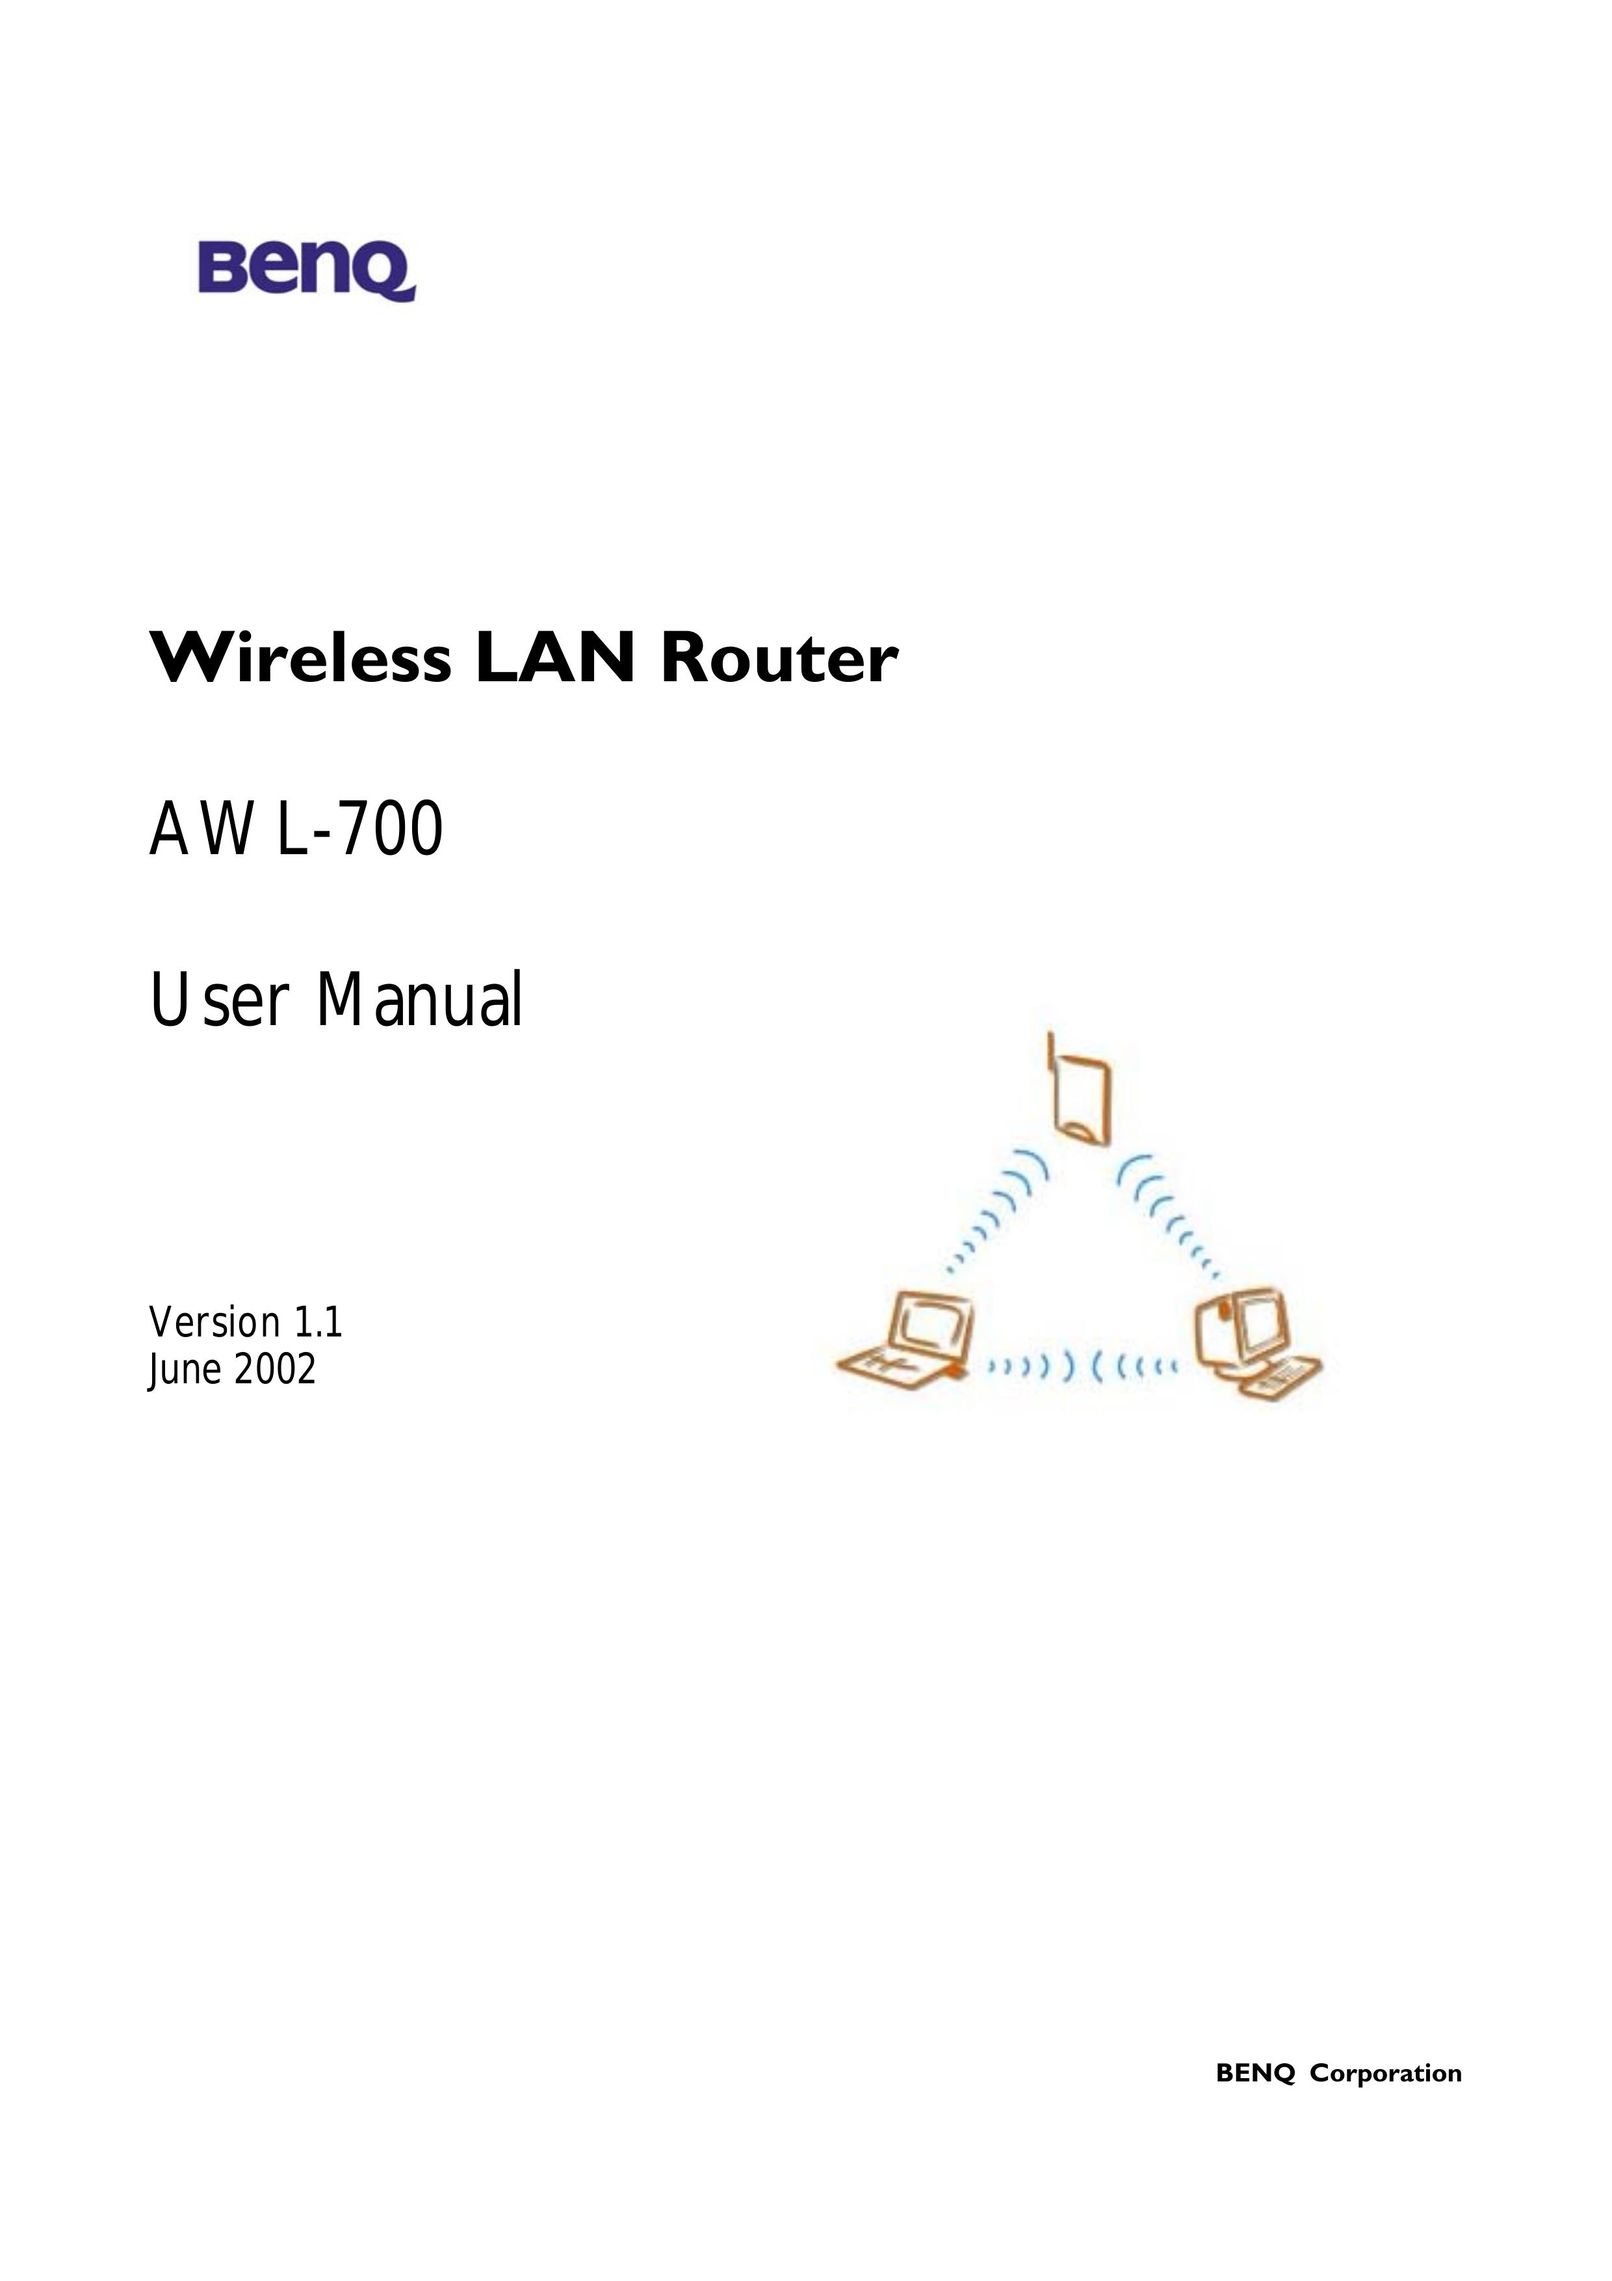 BenQ AWL-700 Network Router User Manual